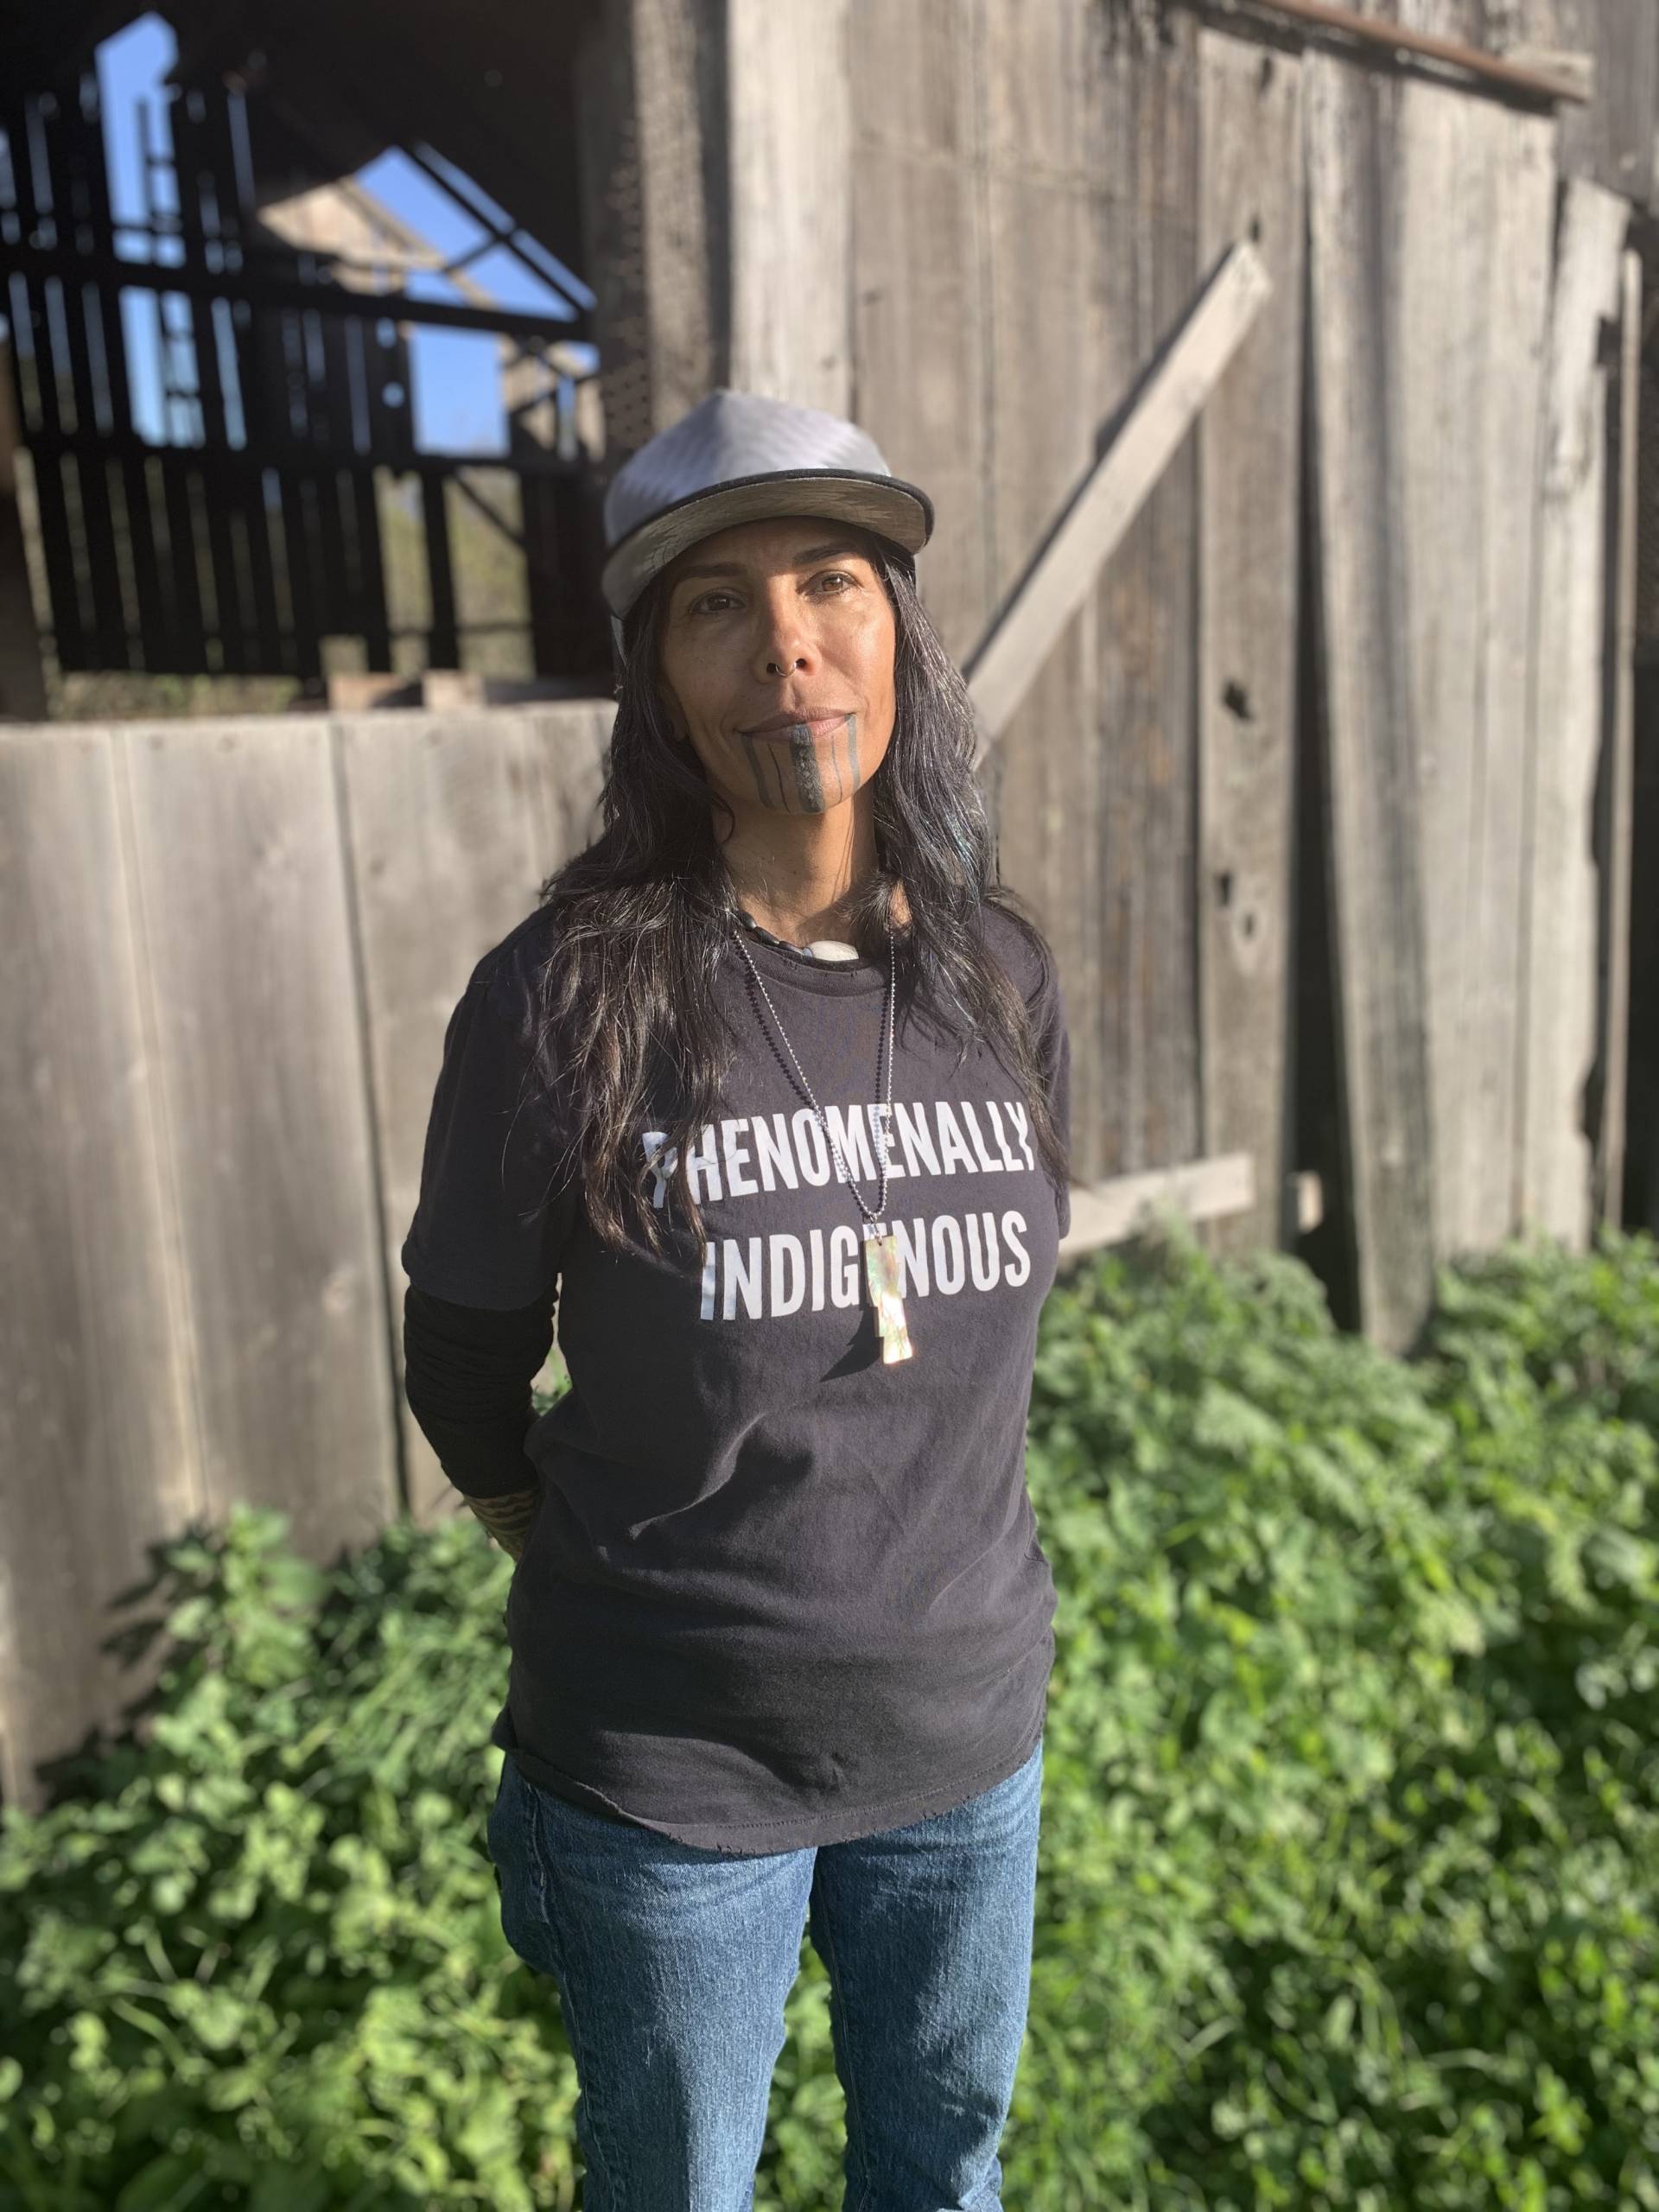 A women with a cap standing outside next to a barn, and wearing a t-shirt that says 'Phenomenally Indigenous.'